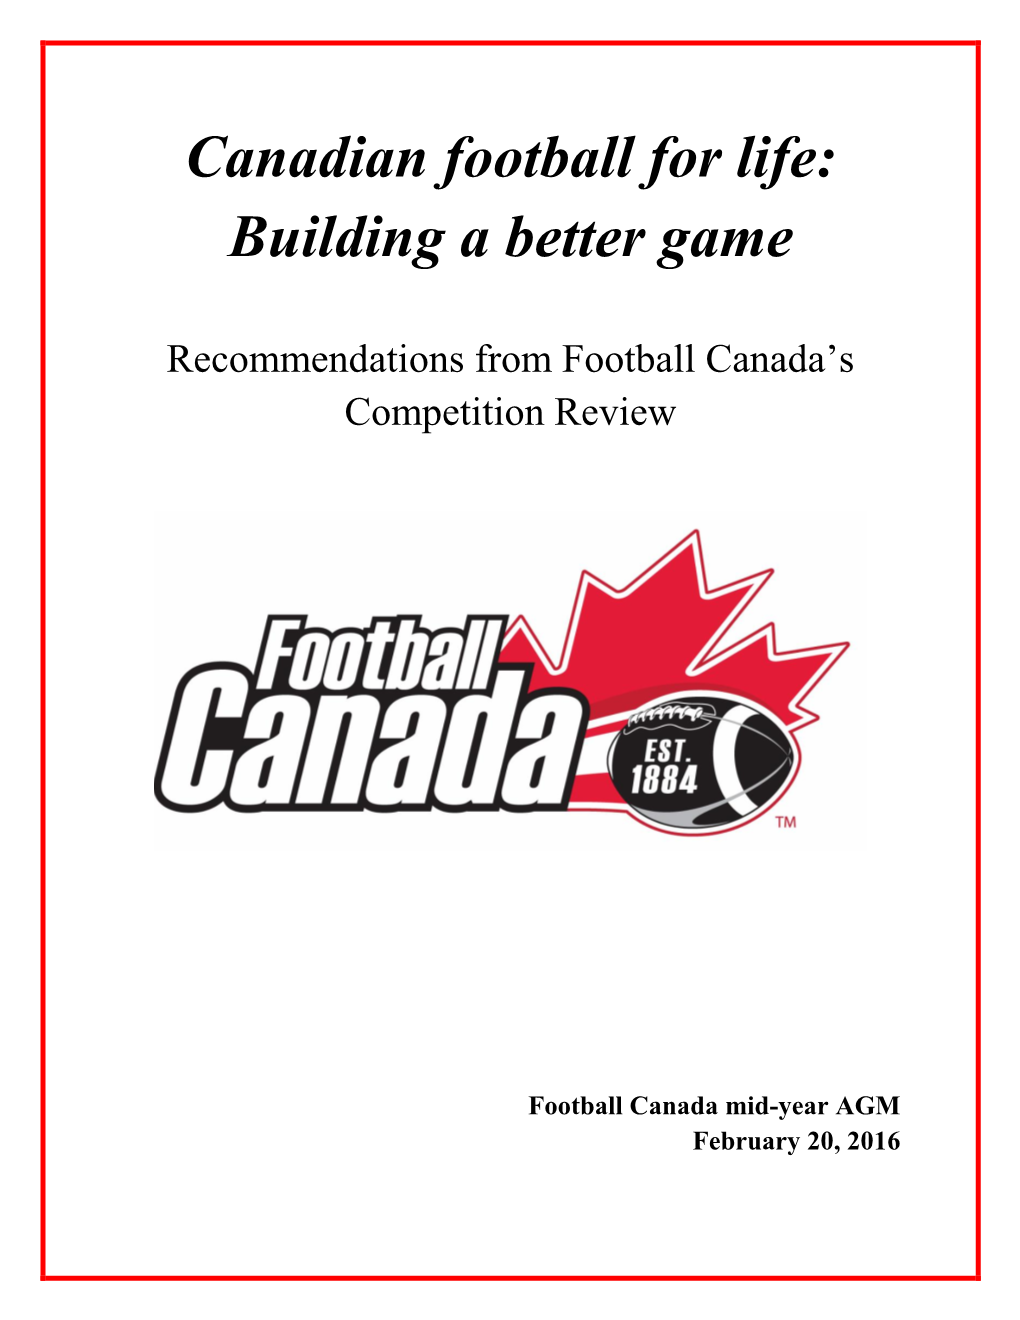 Canadian Football for Life: Building a Better Game